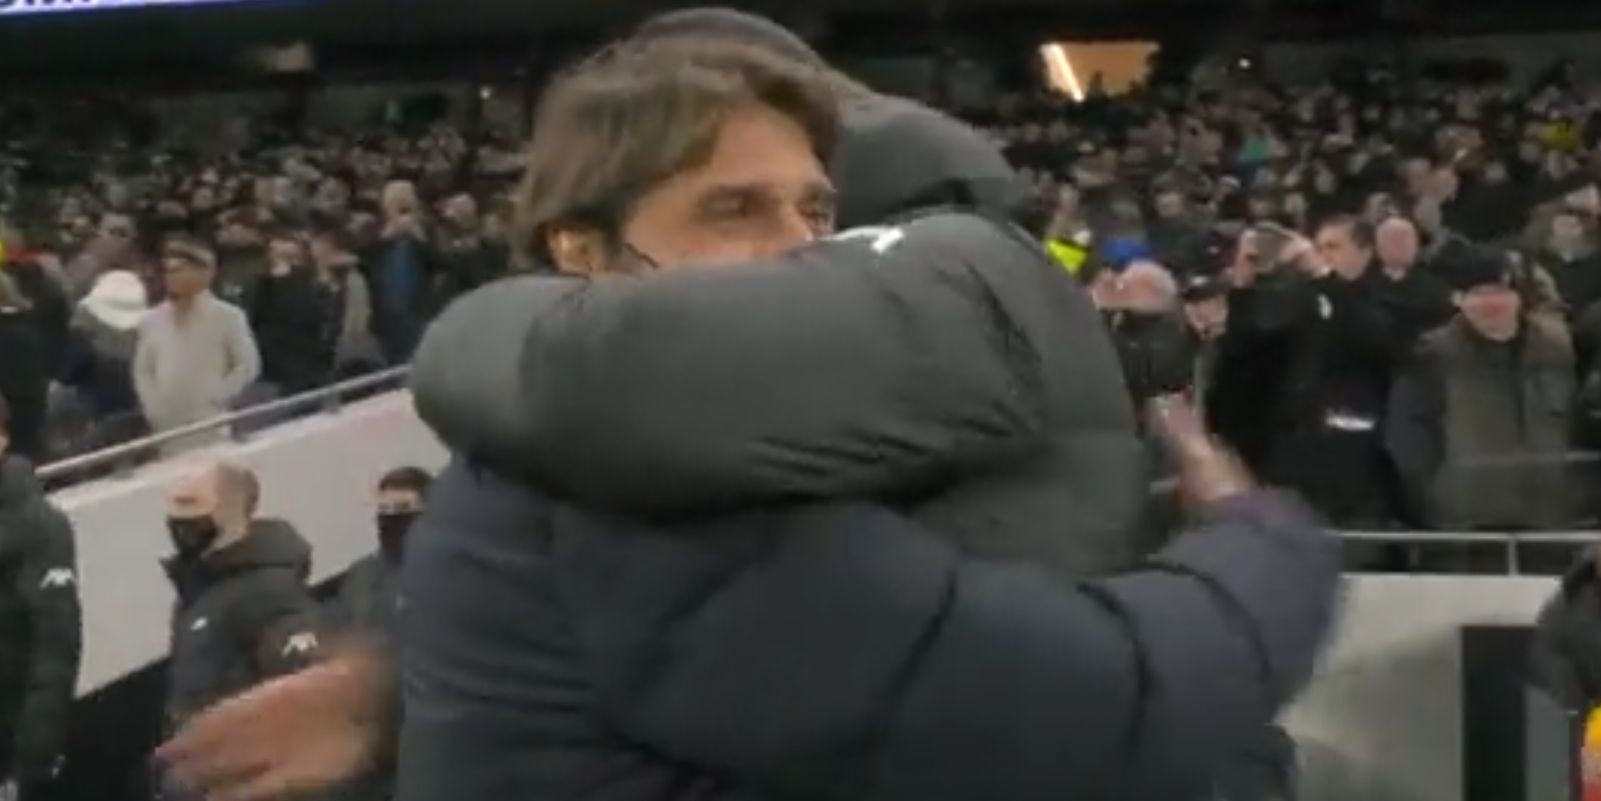 (Video) Awkward handshake/fist-bump between Klopp and Conte leads to impromptu hug between masked managers